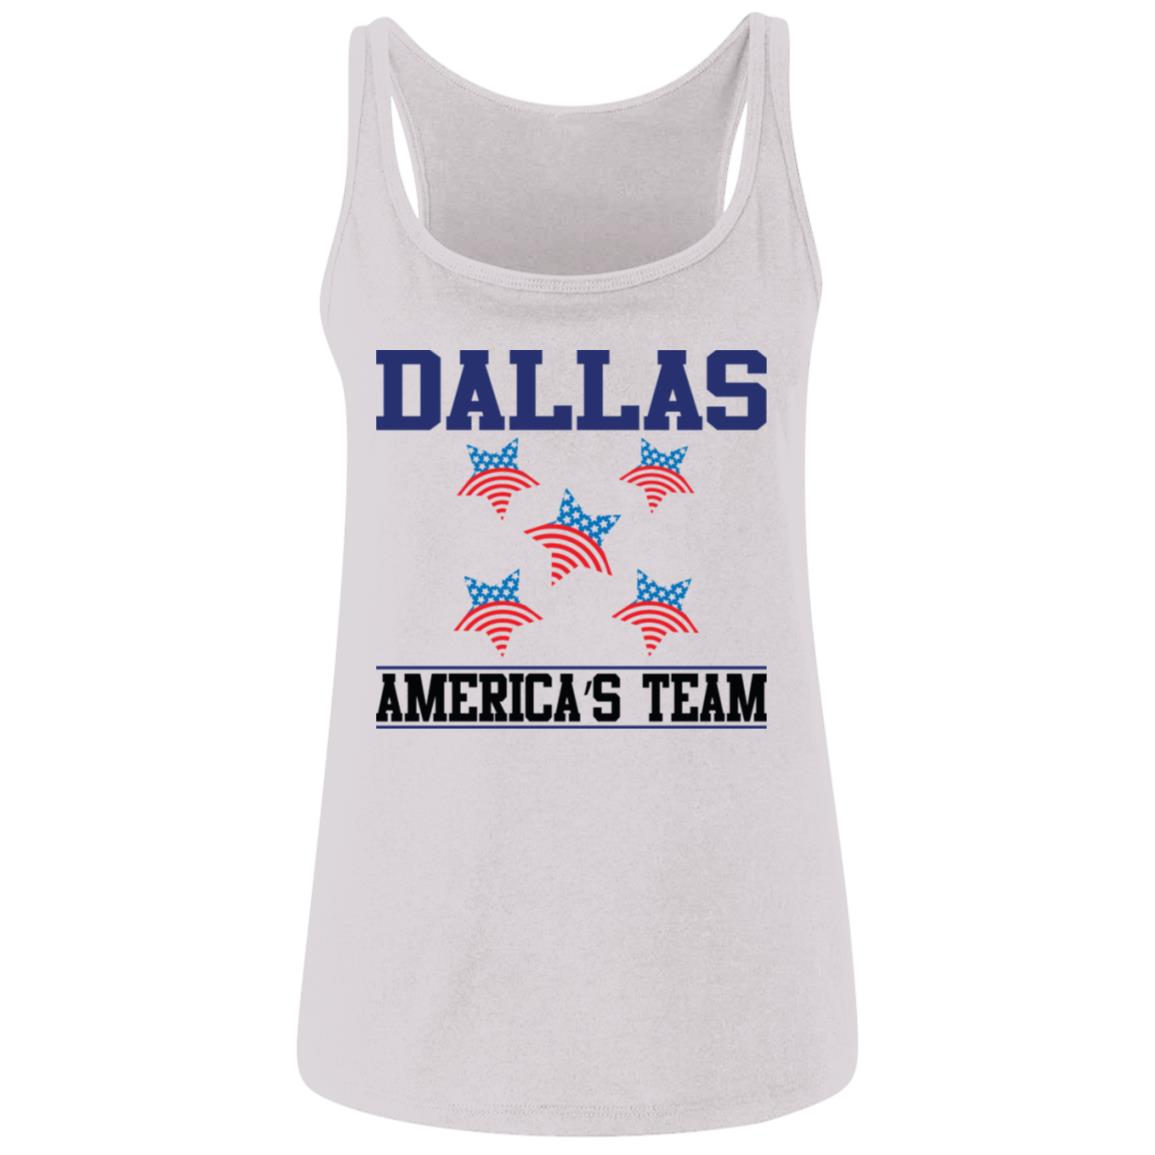 Dallas (AT) Ladies' Relaxed Jersey Tank